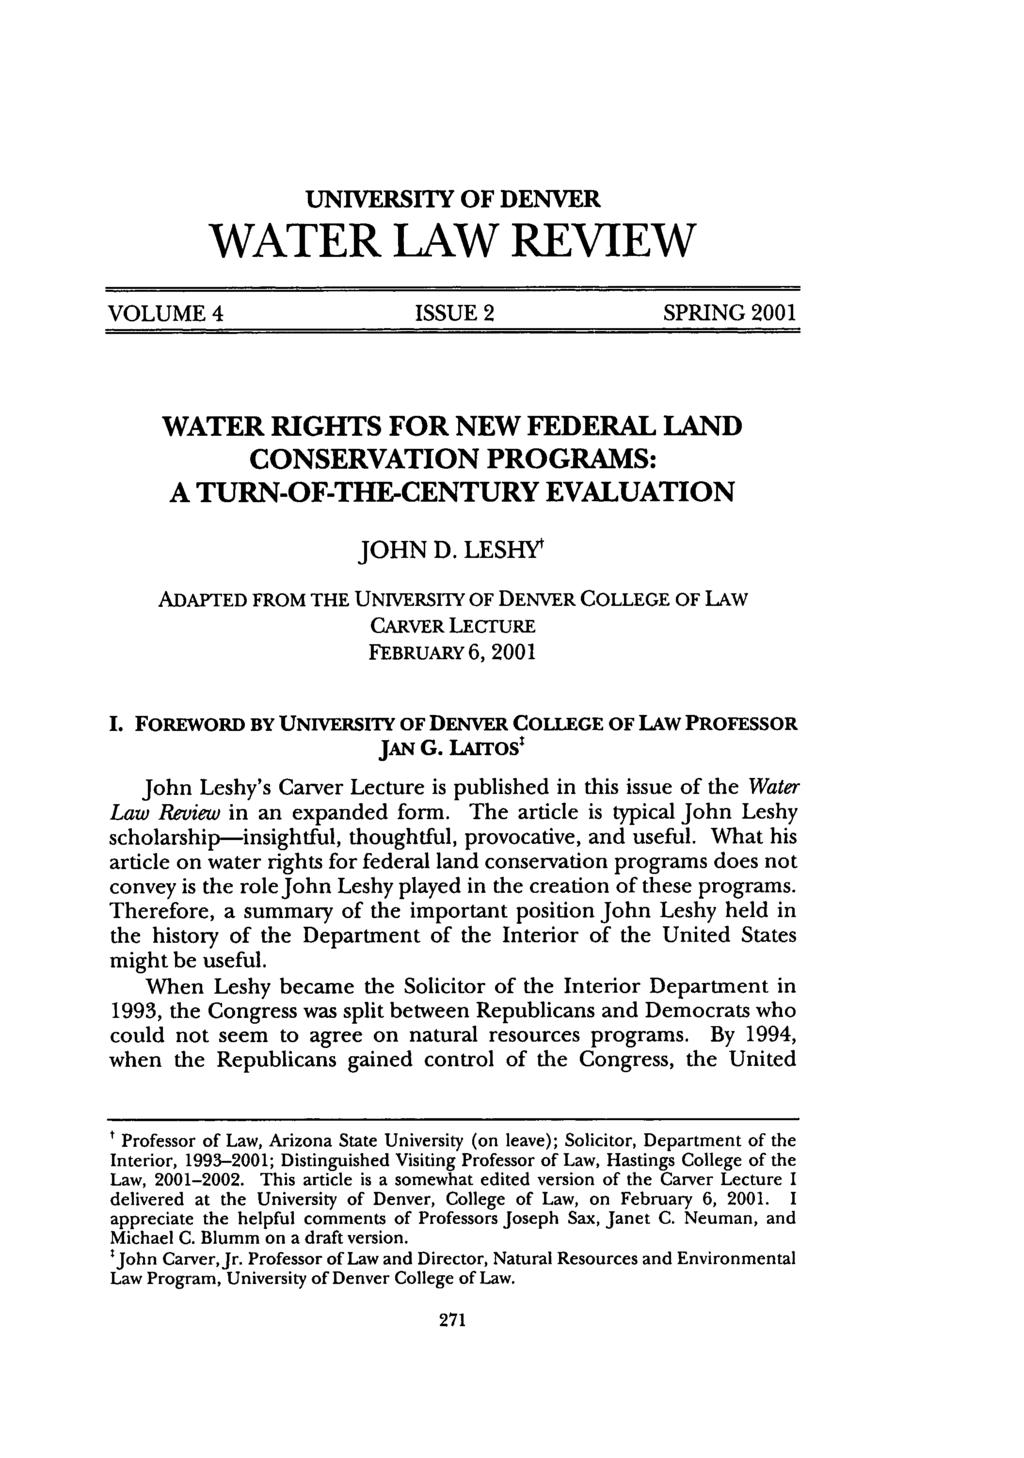 UNIVERSITY OF DENVER WATER LAW REVIEW VOLUME 4 ISSUE 2 SPRING 2001 WATER RIGHTS FOR NEW FEDERAL LAND CONSERVATION PROGRAMS: A TURN-OF-THE-CENTURY EVALUATION JOHN D.